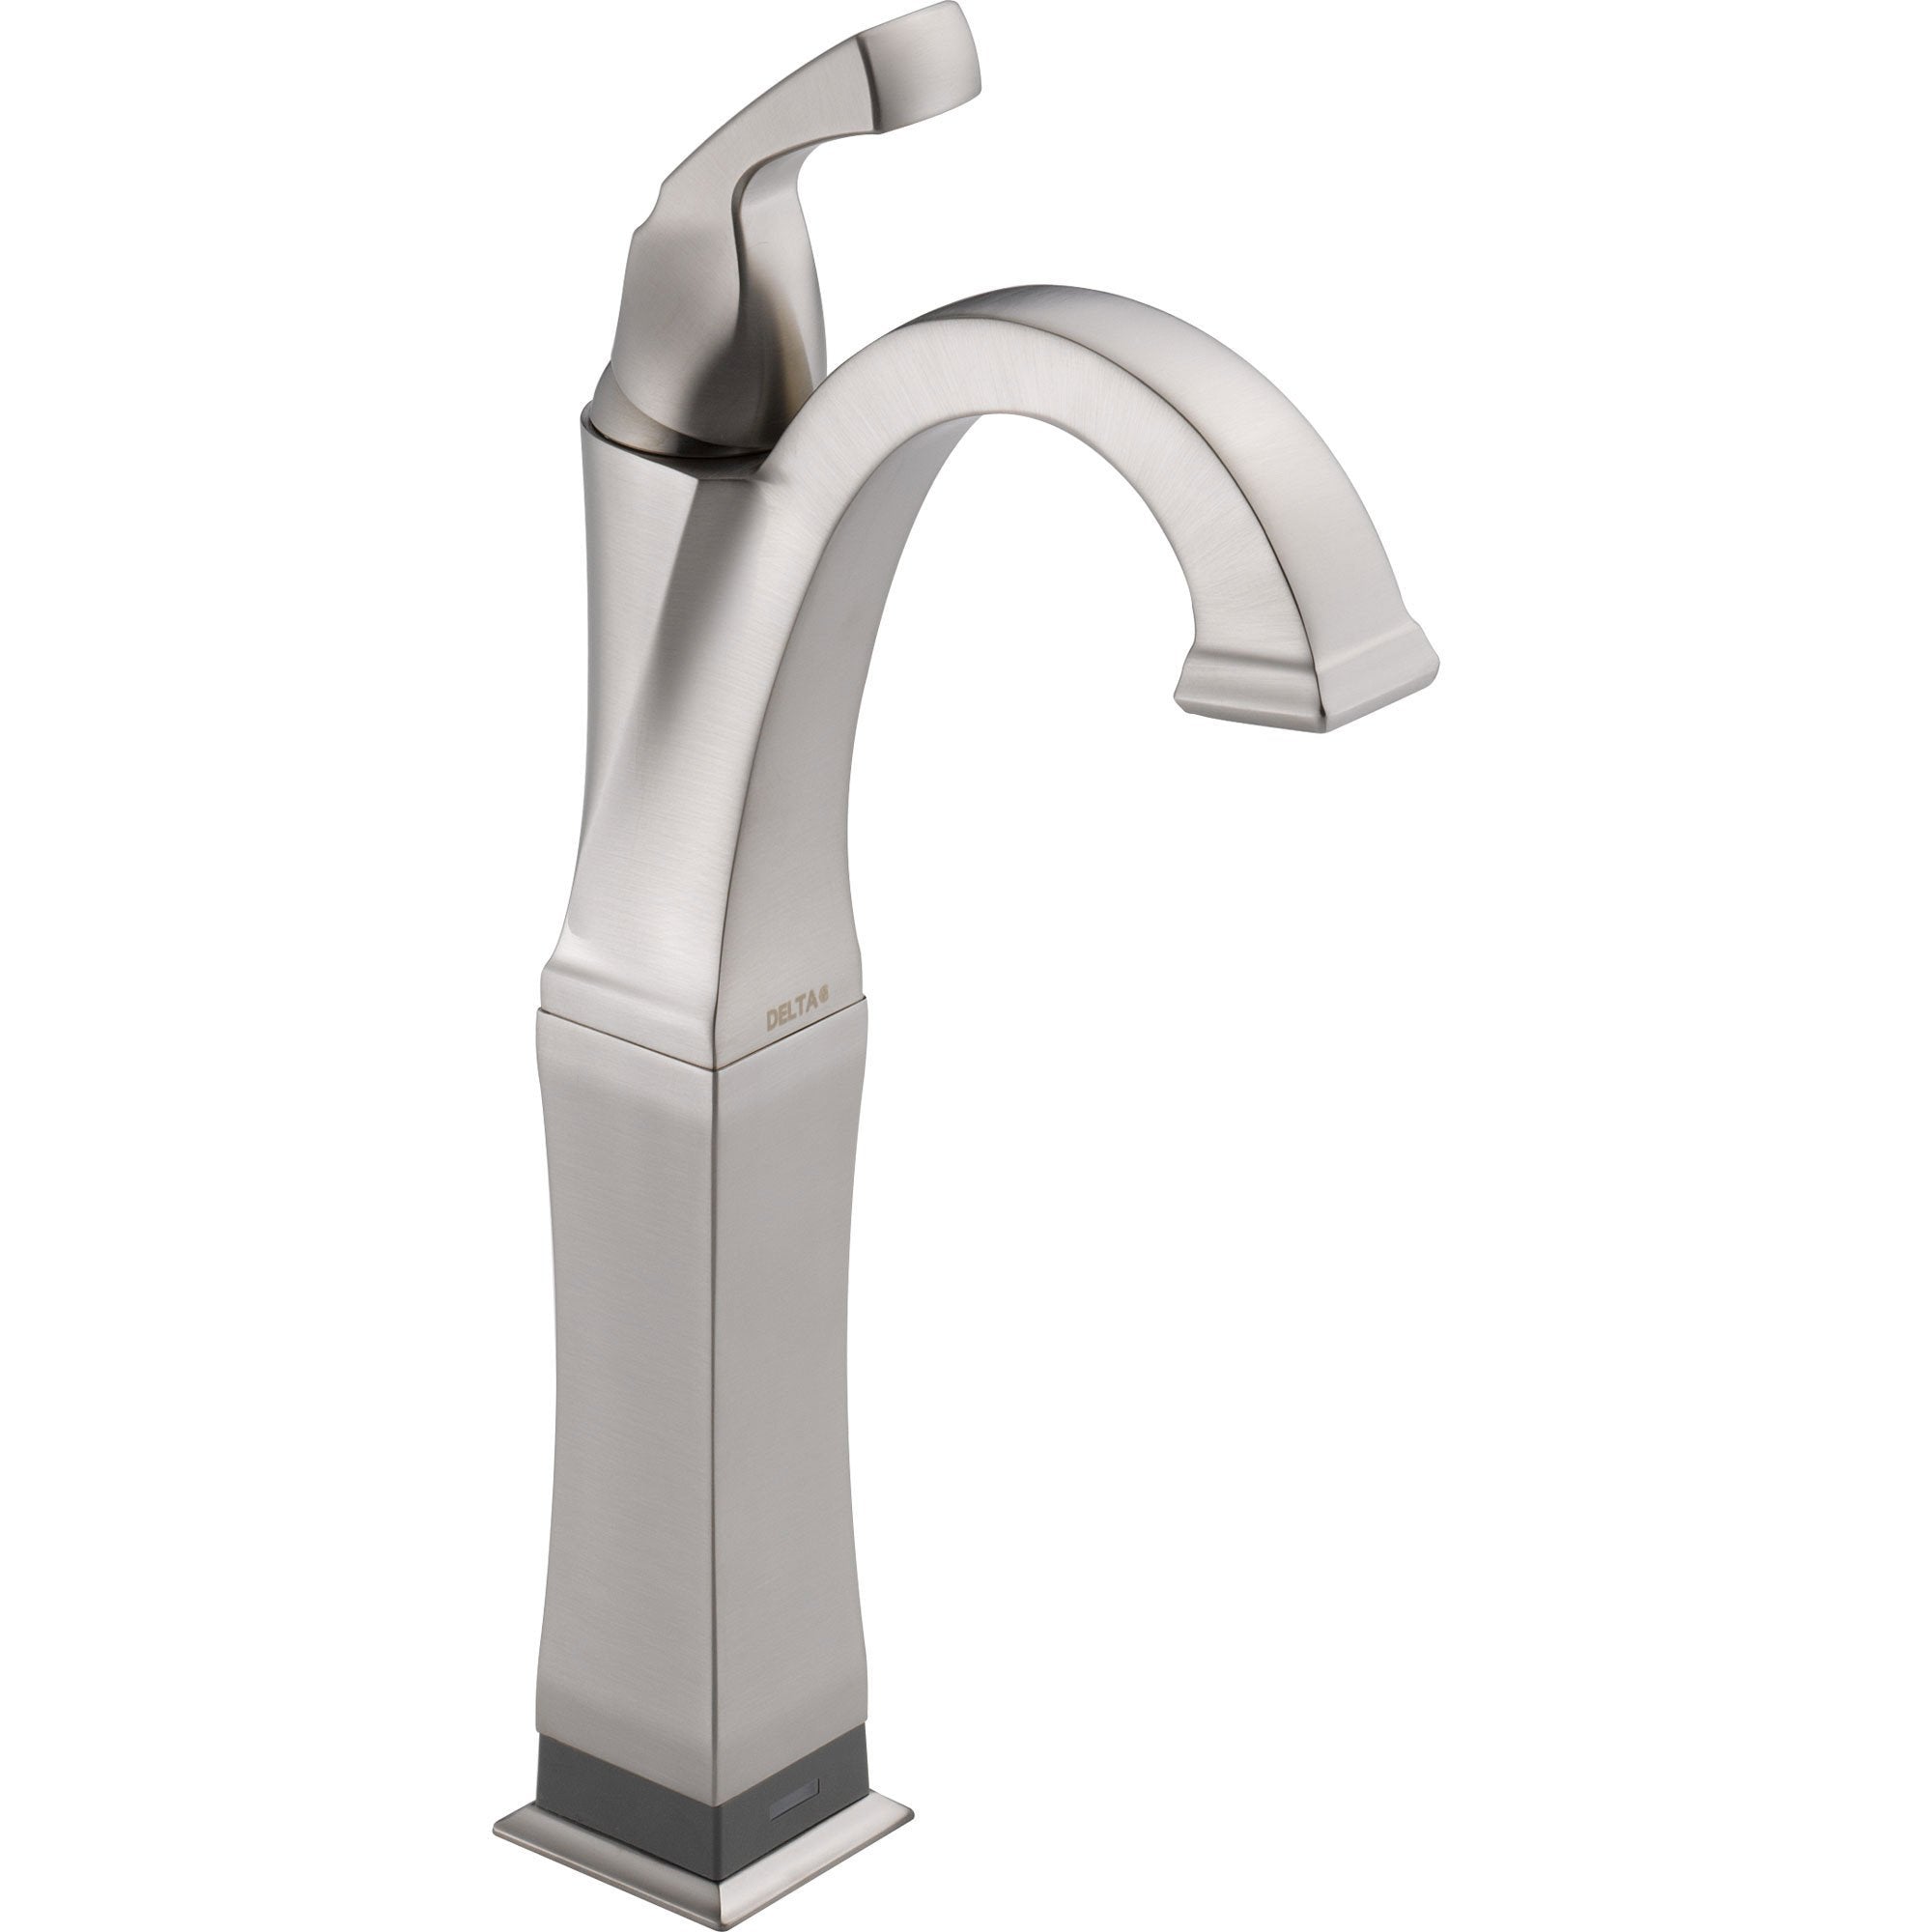 Delta Dryden Touch2O Stainless Steel Finish Vessel Sink Bathroom Faucet 634102